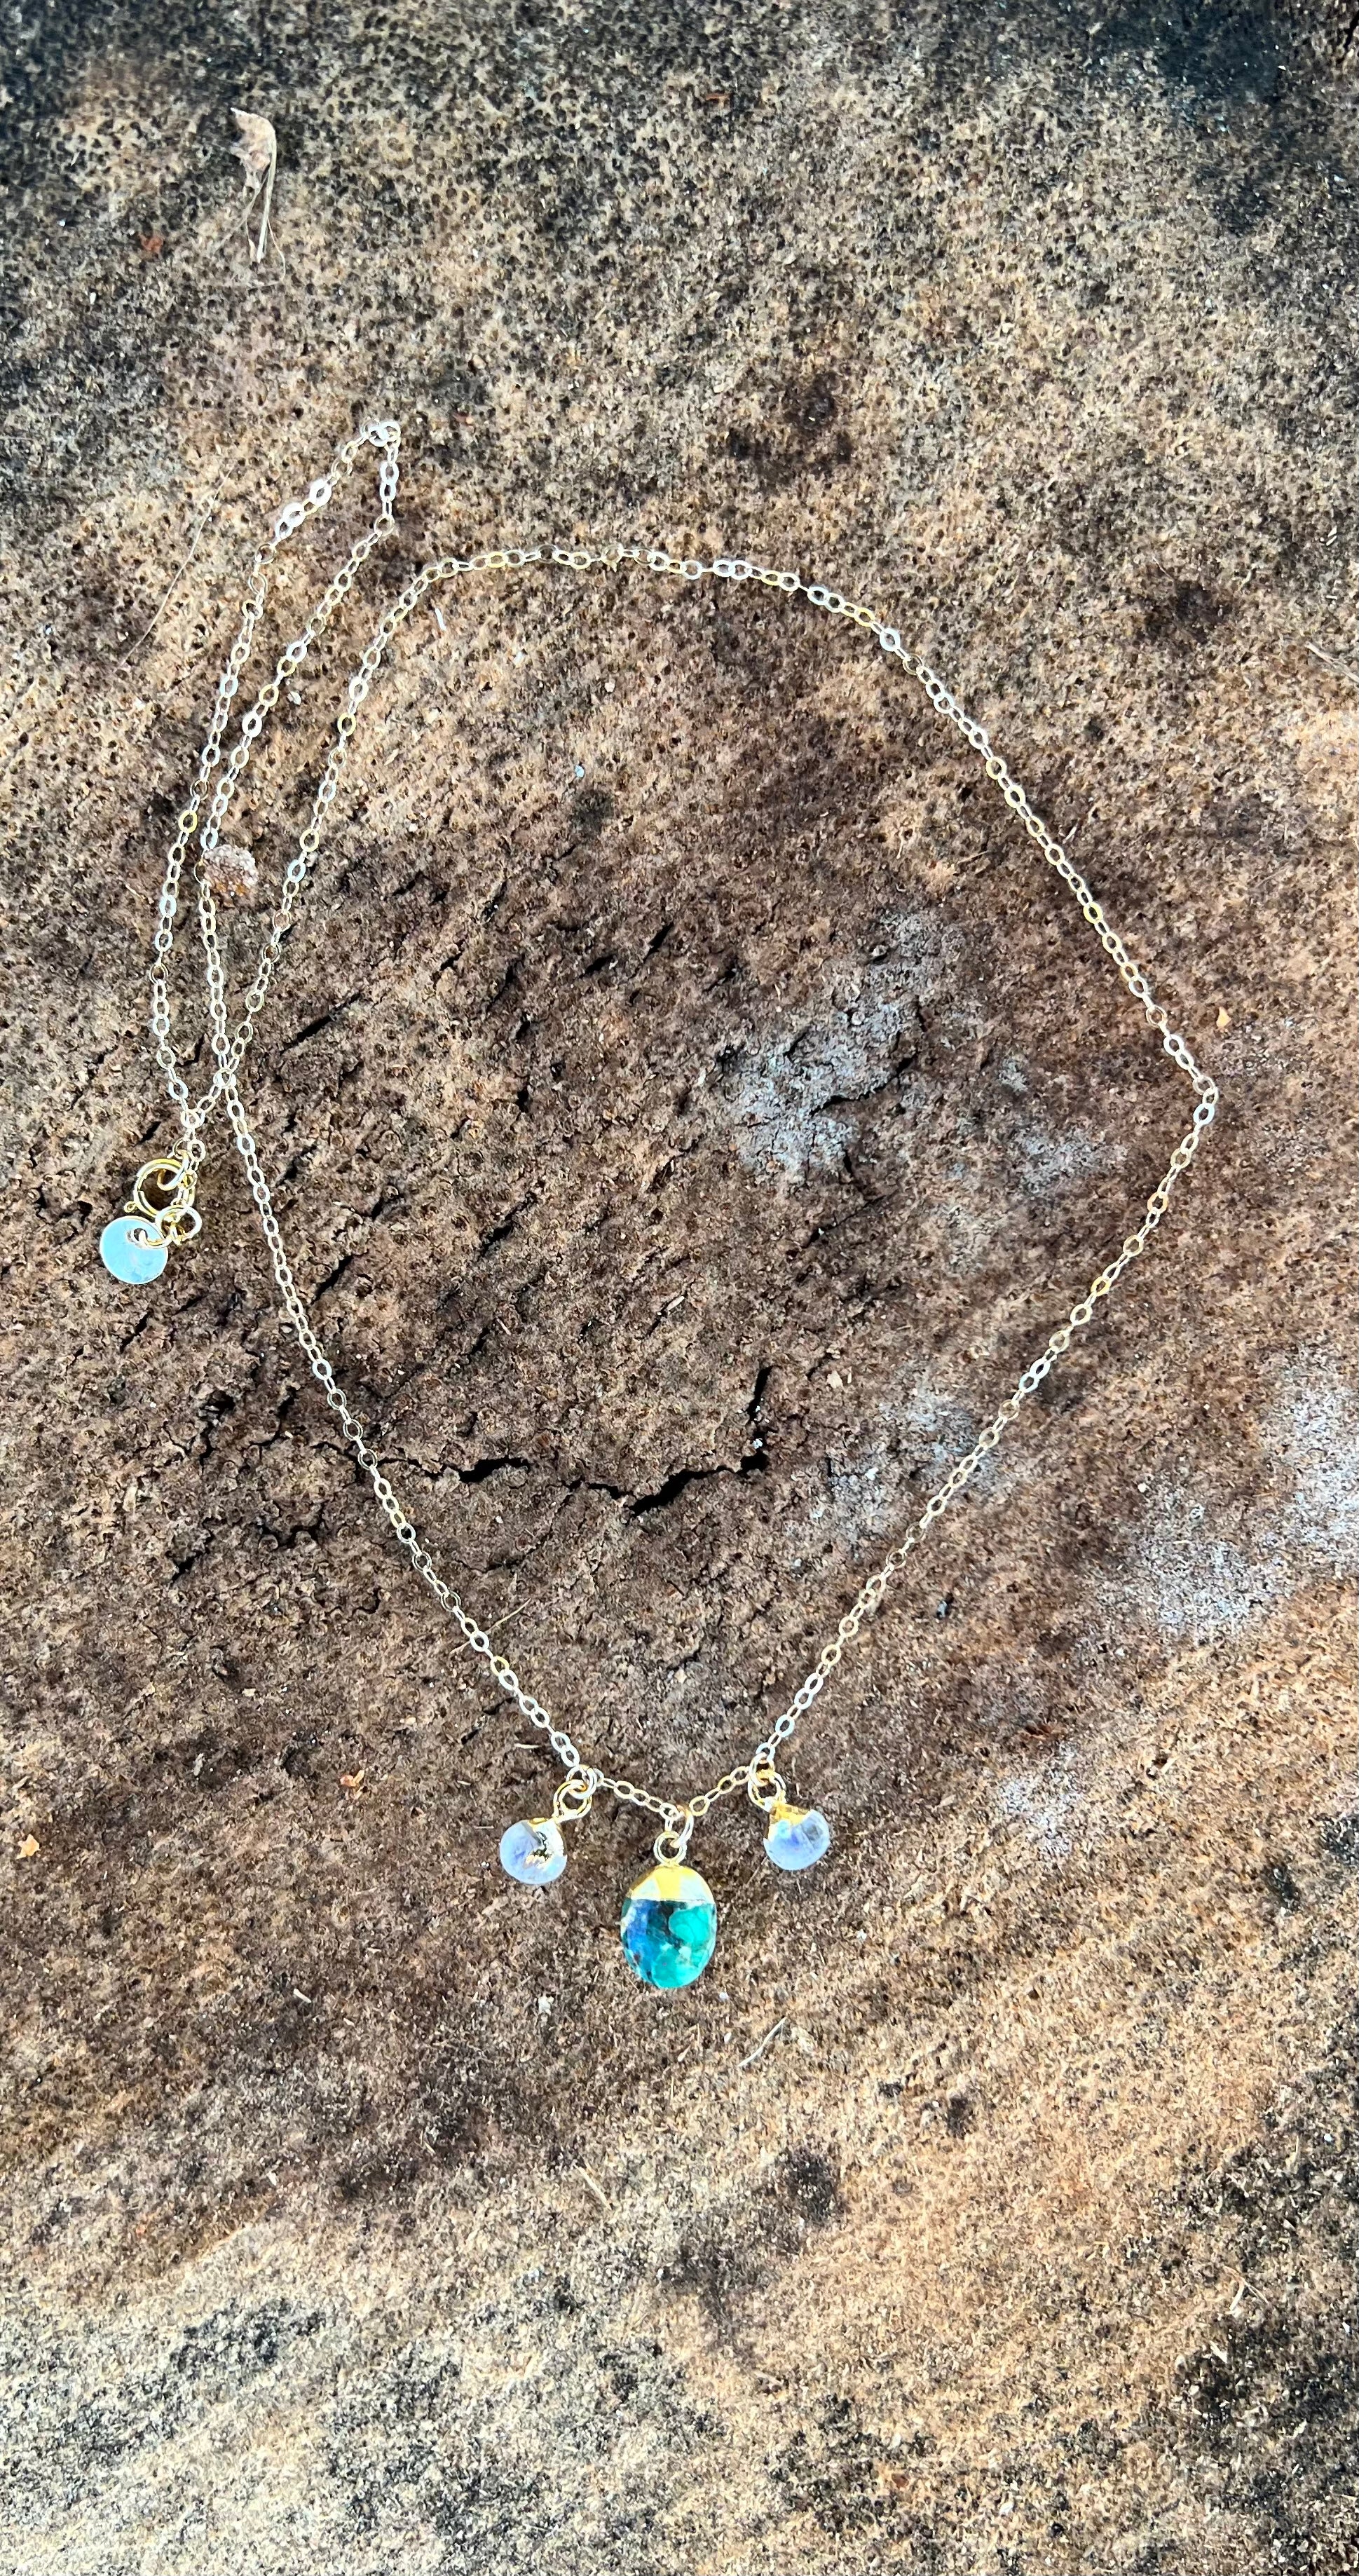 Turquoise and Moonstone Necklace